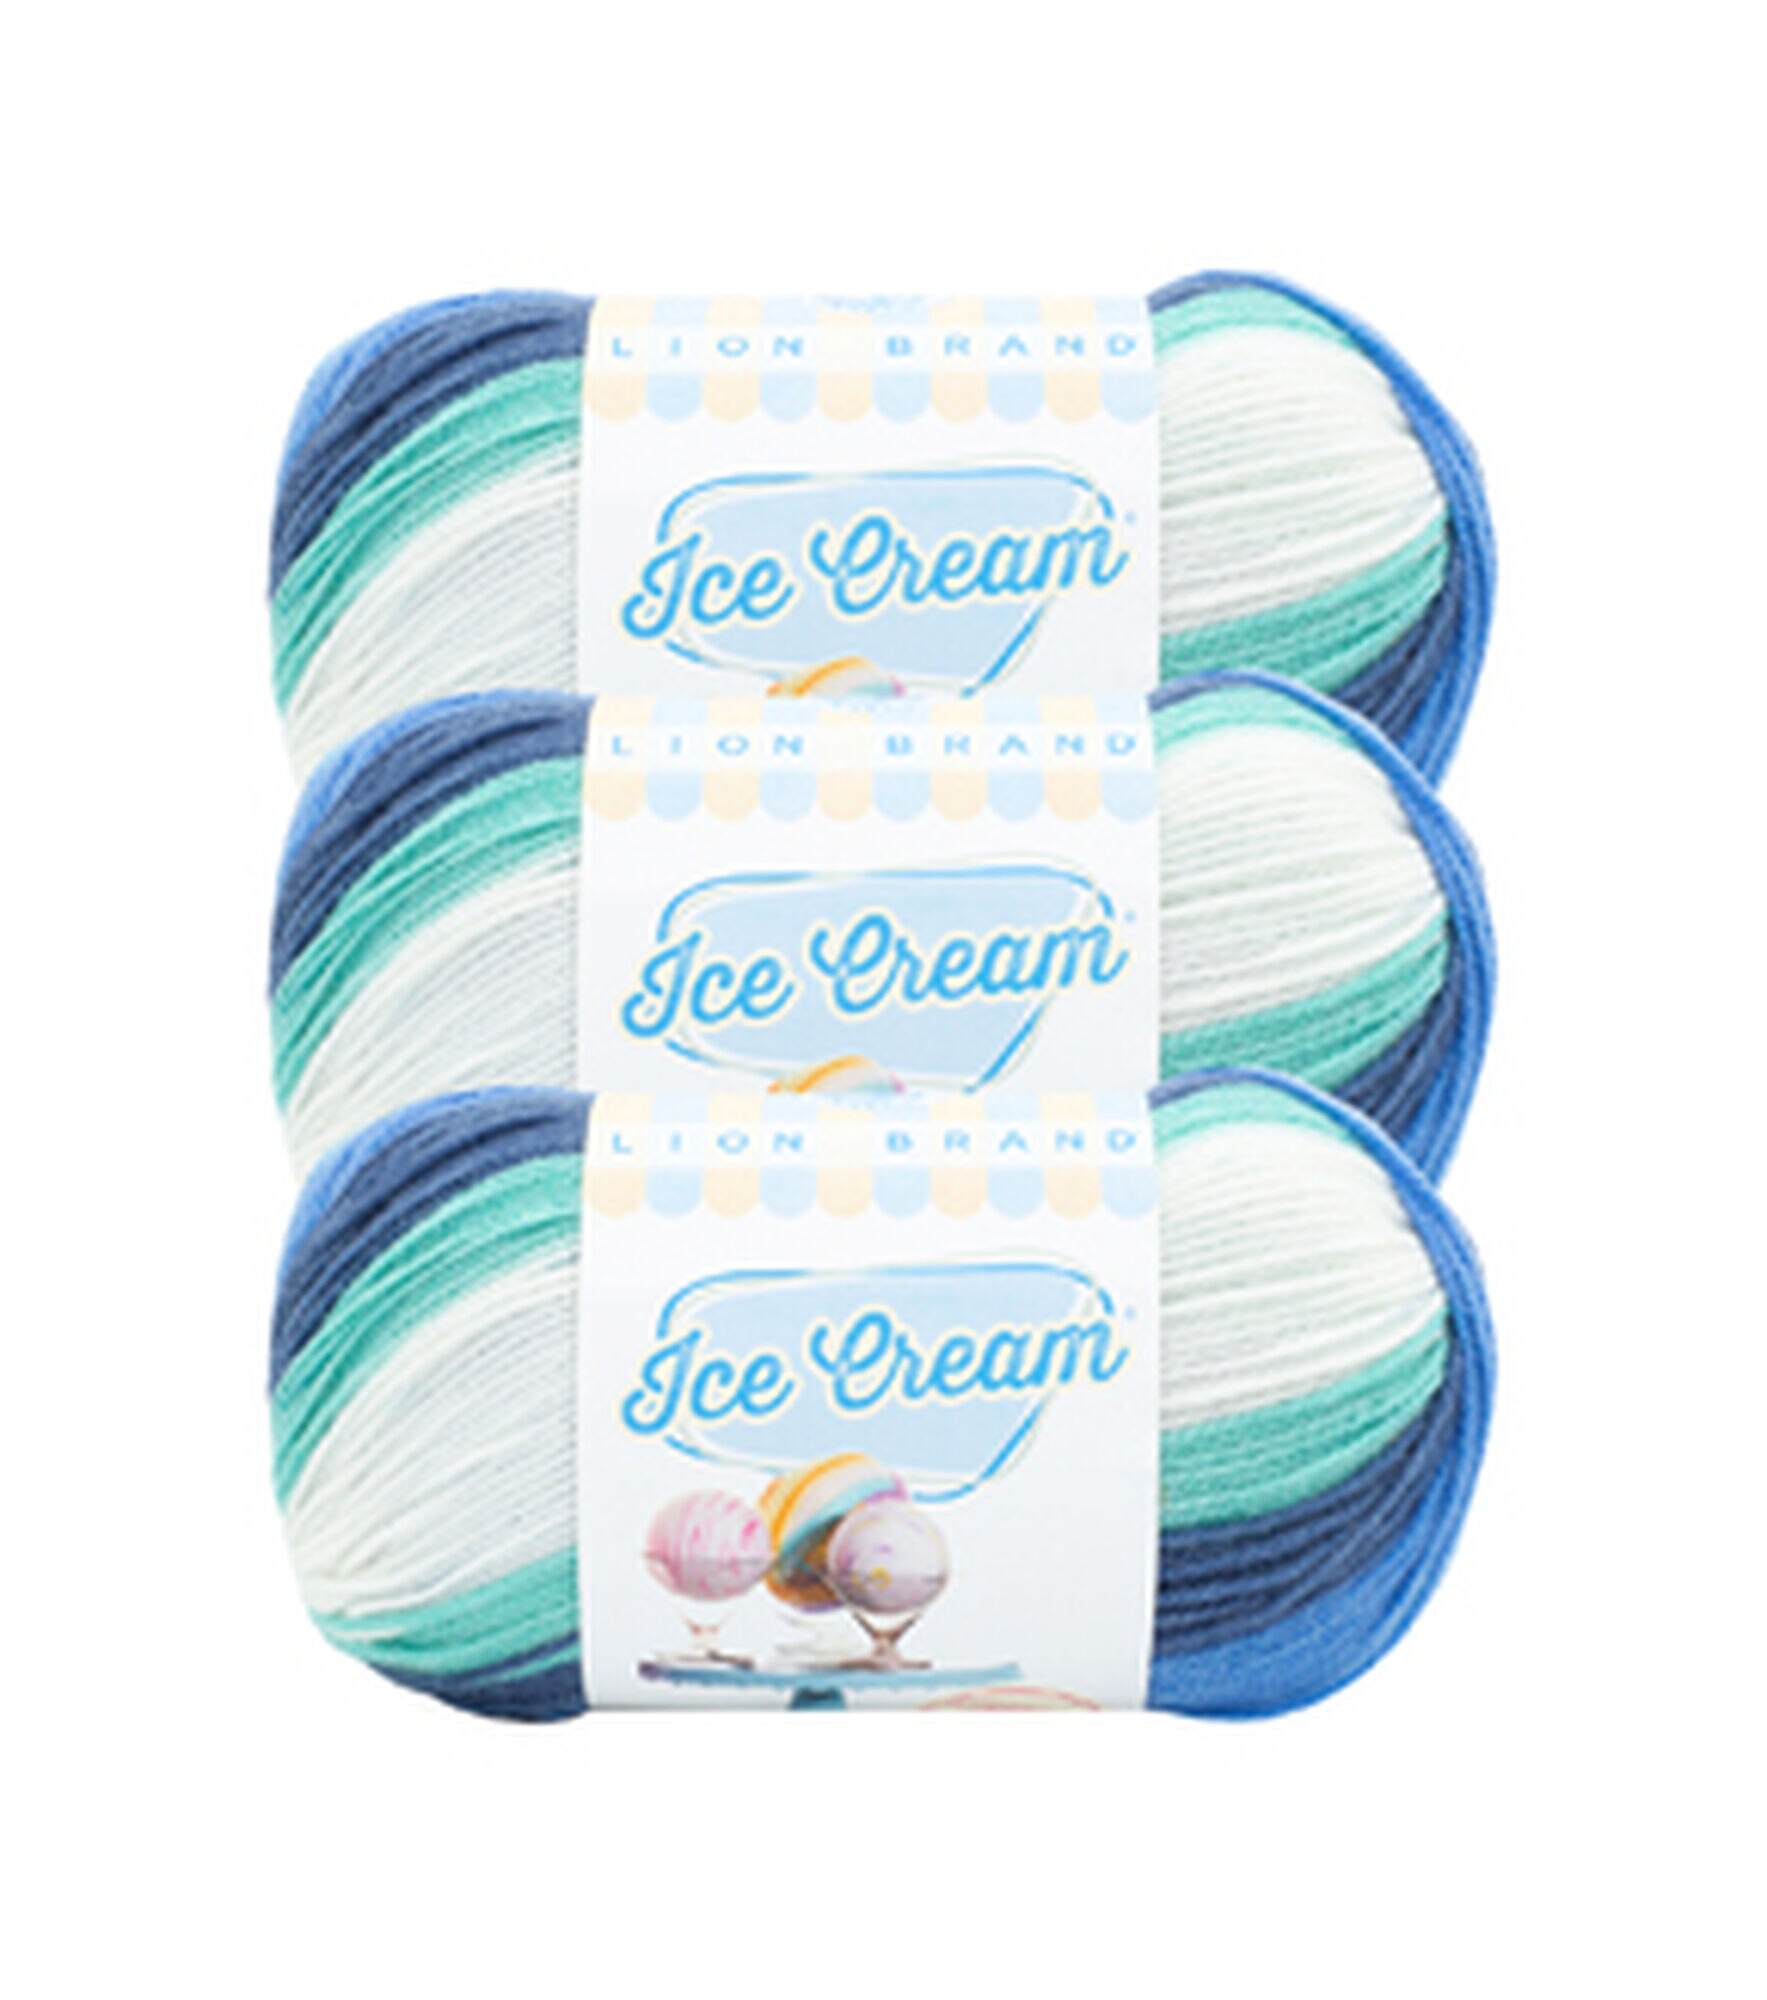 Lion Brand Yarn - Ice Cream - 3 Pack with Pattern Cards in Color (Ube)